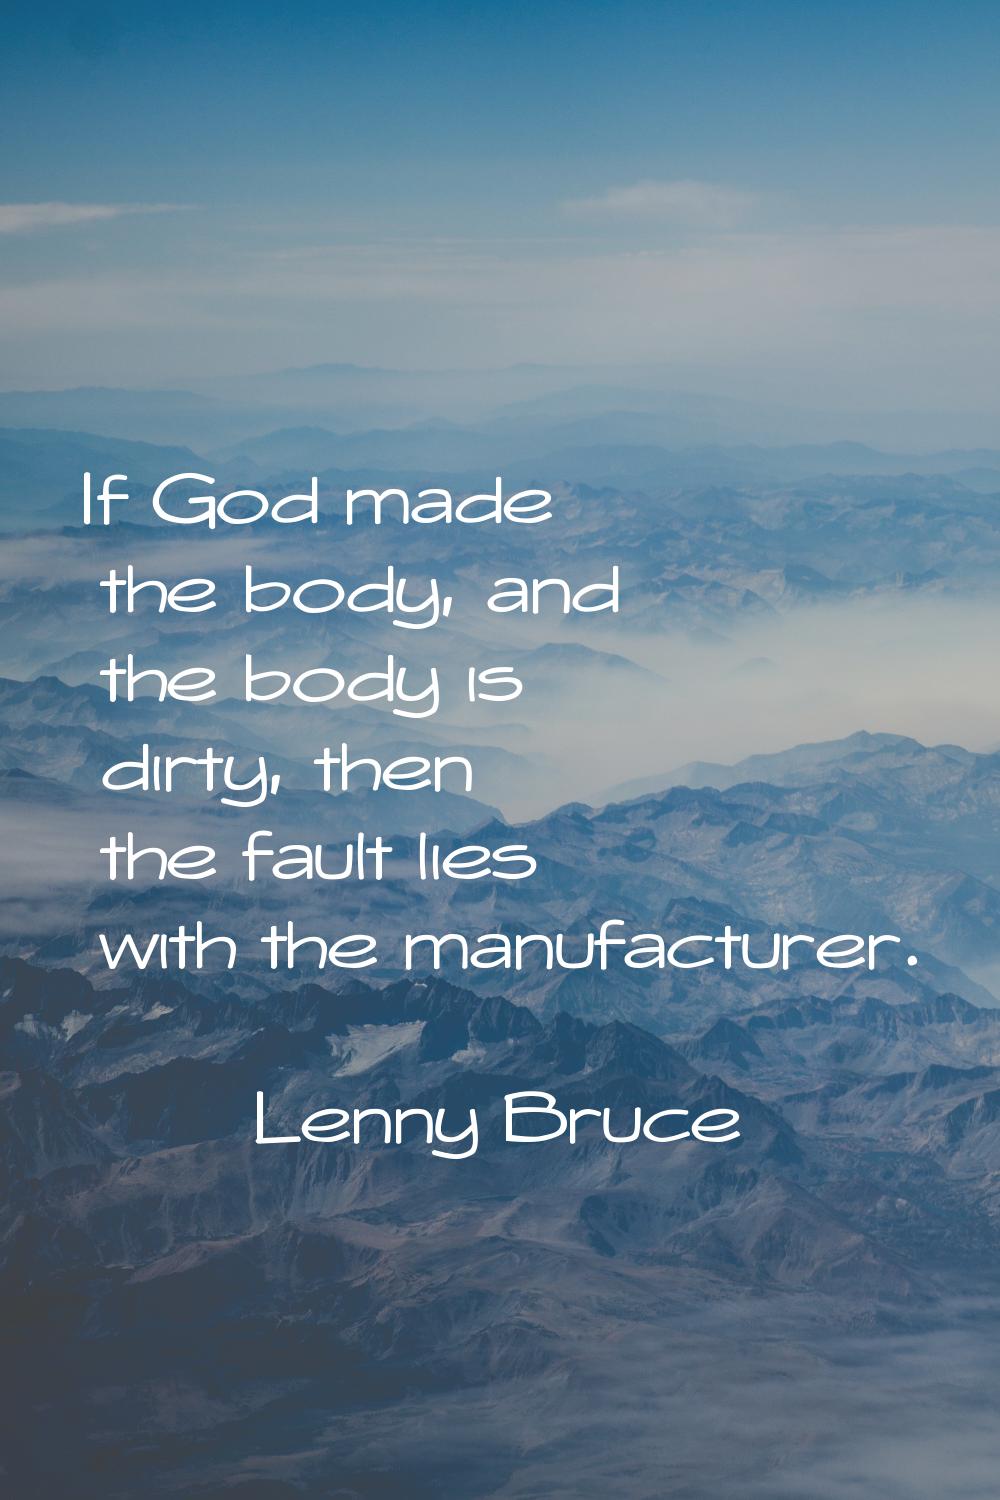 If God made the body, and the body is dirty, then the fault lies with the manufacturer.